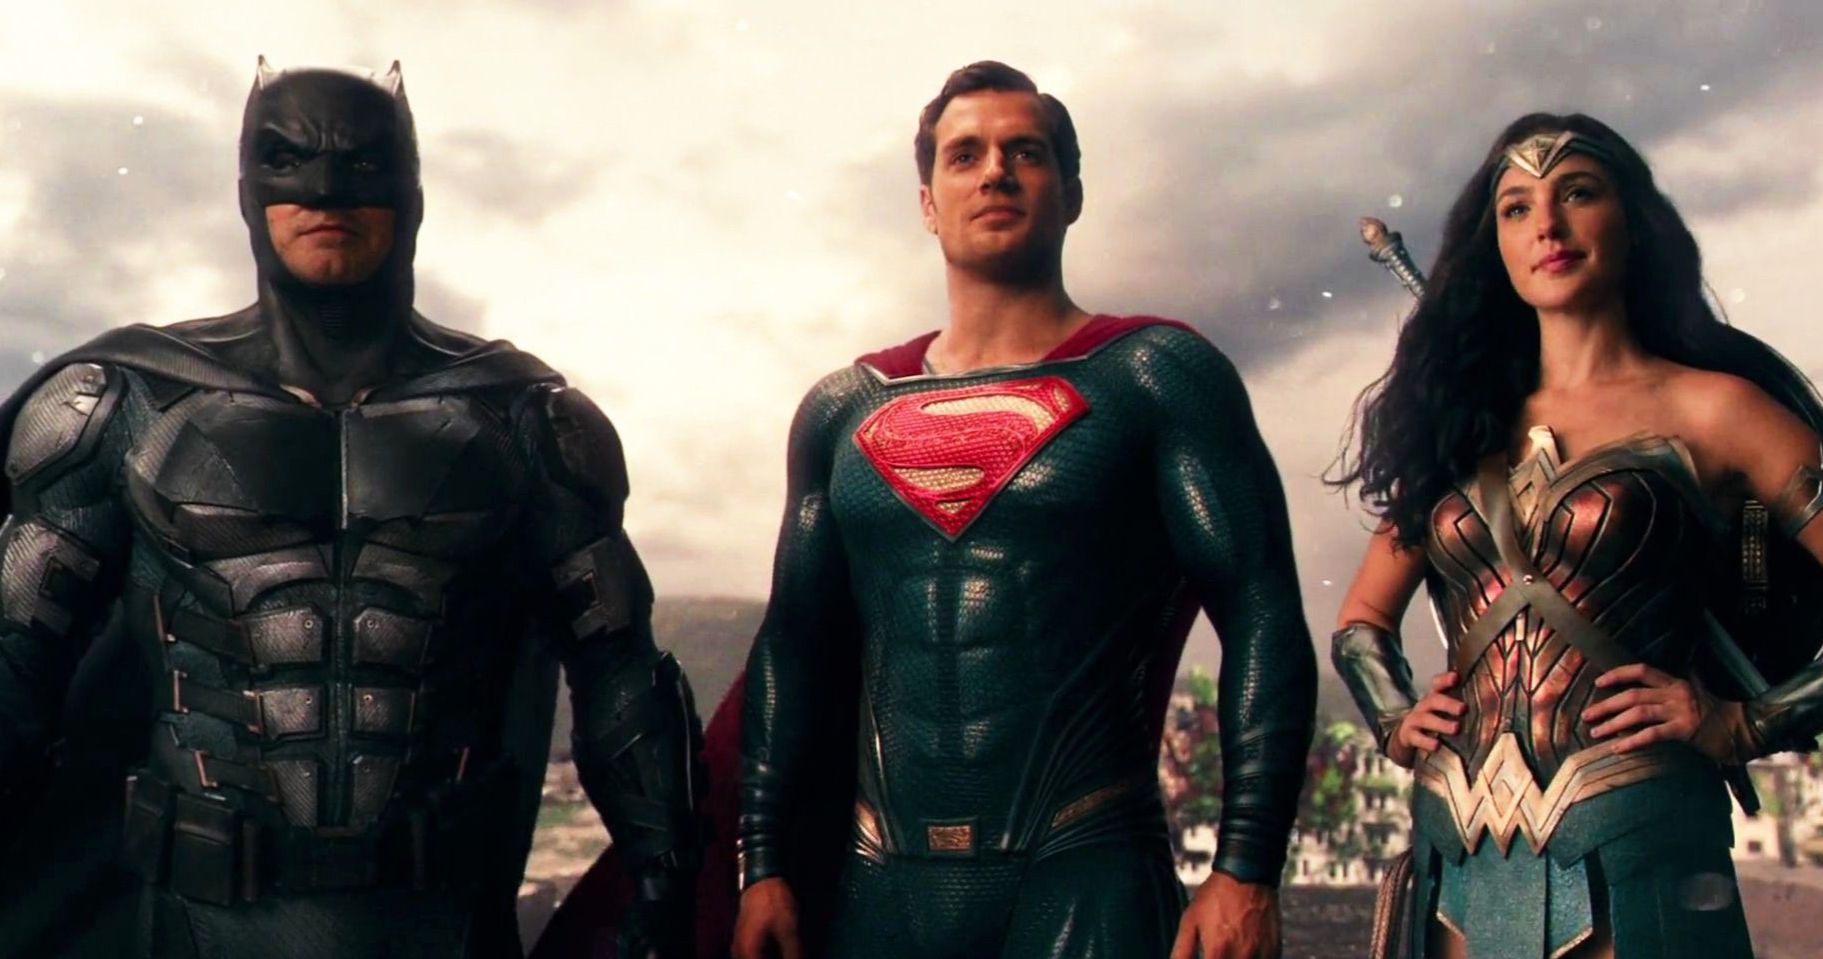 Warner Bros. Wanted to Release an Unfinished Cut of Zack Snyder's Justice League